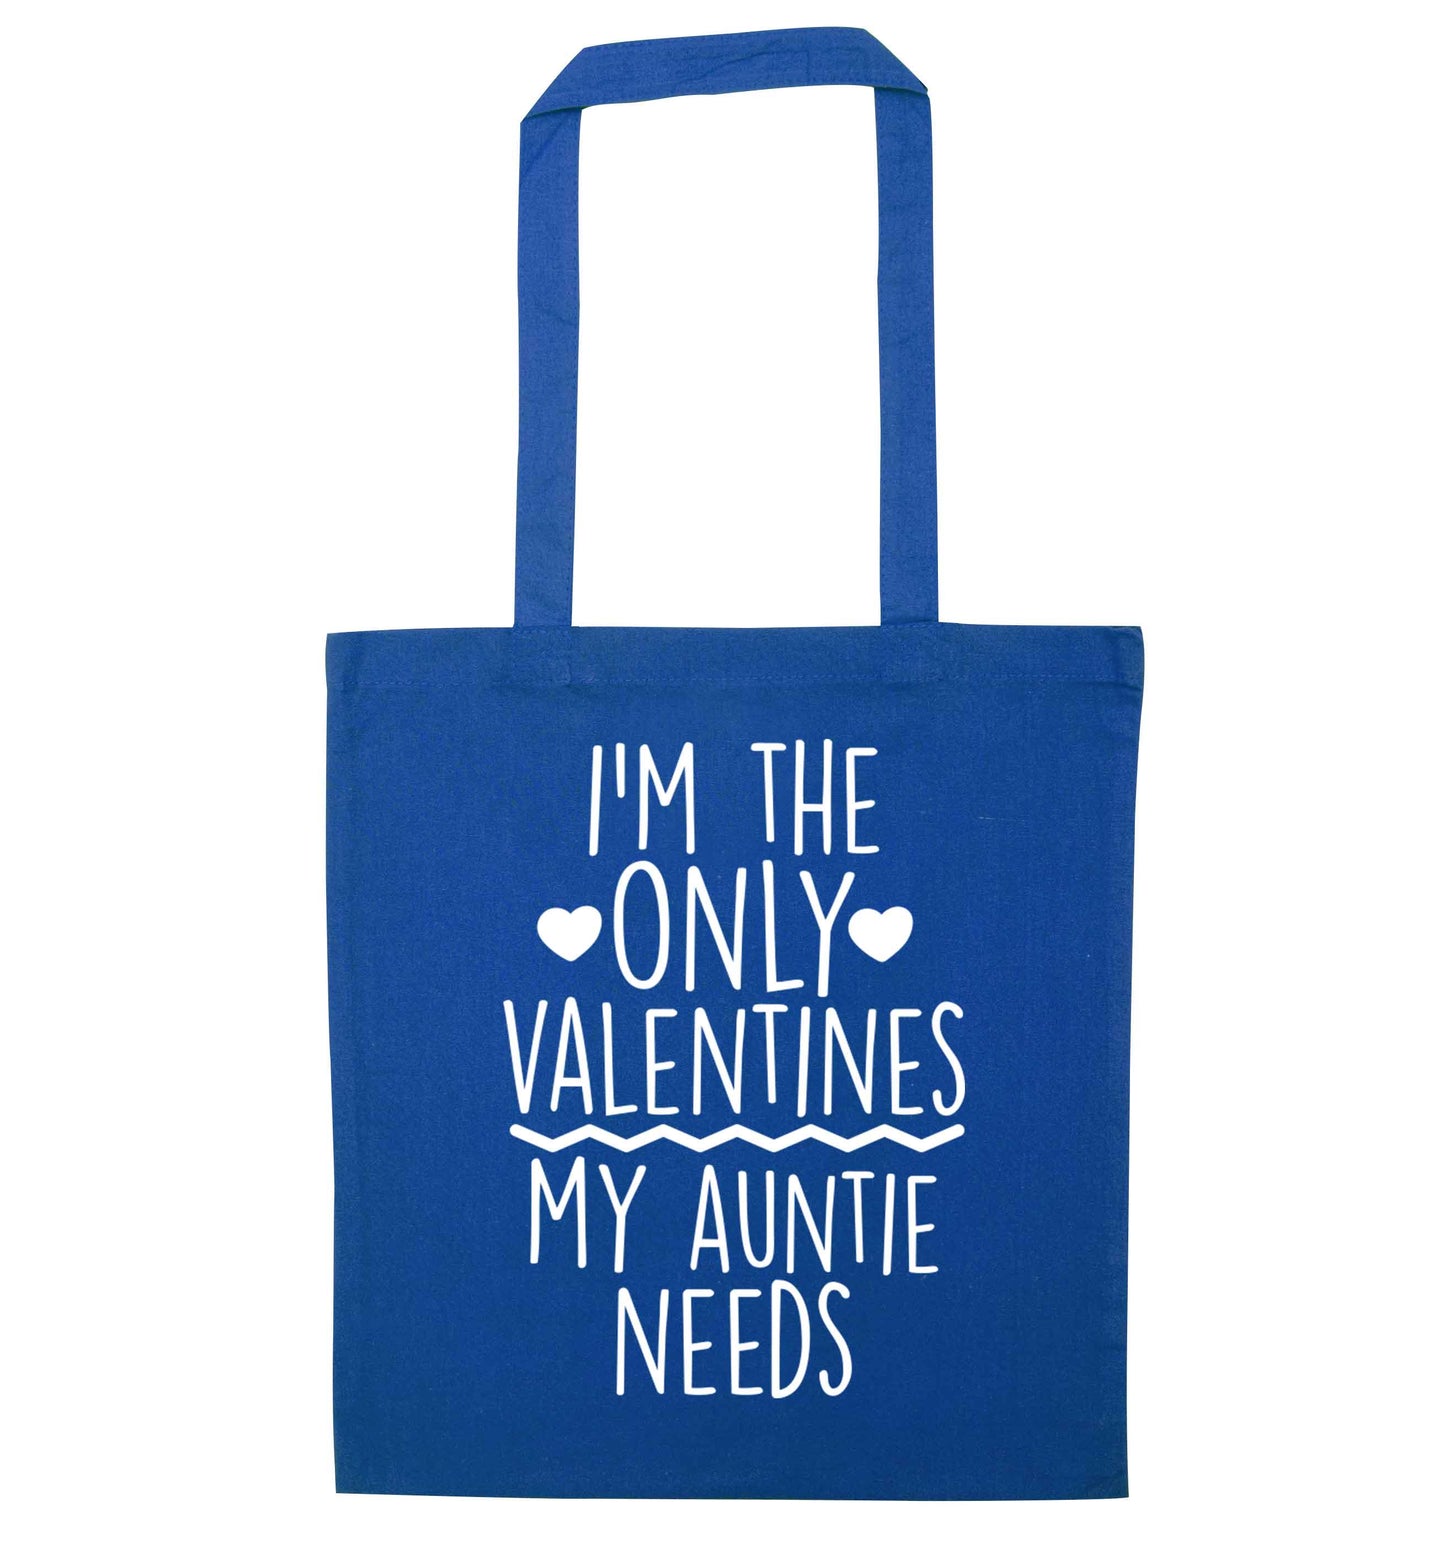 I'm the only valentines my auntie needs blue tote bag